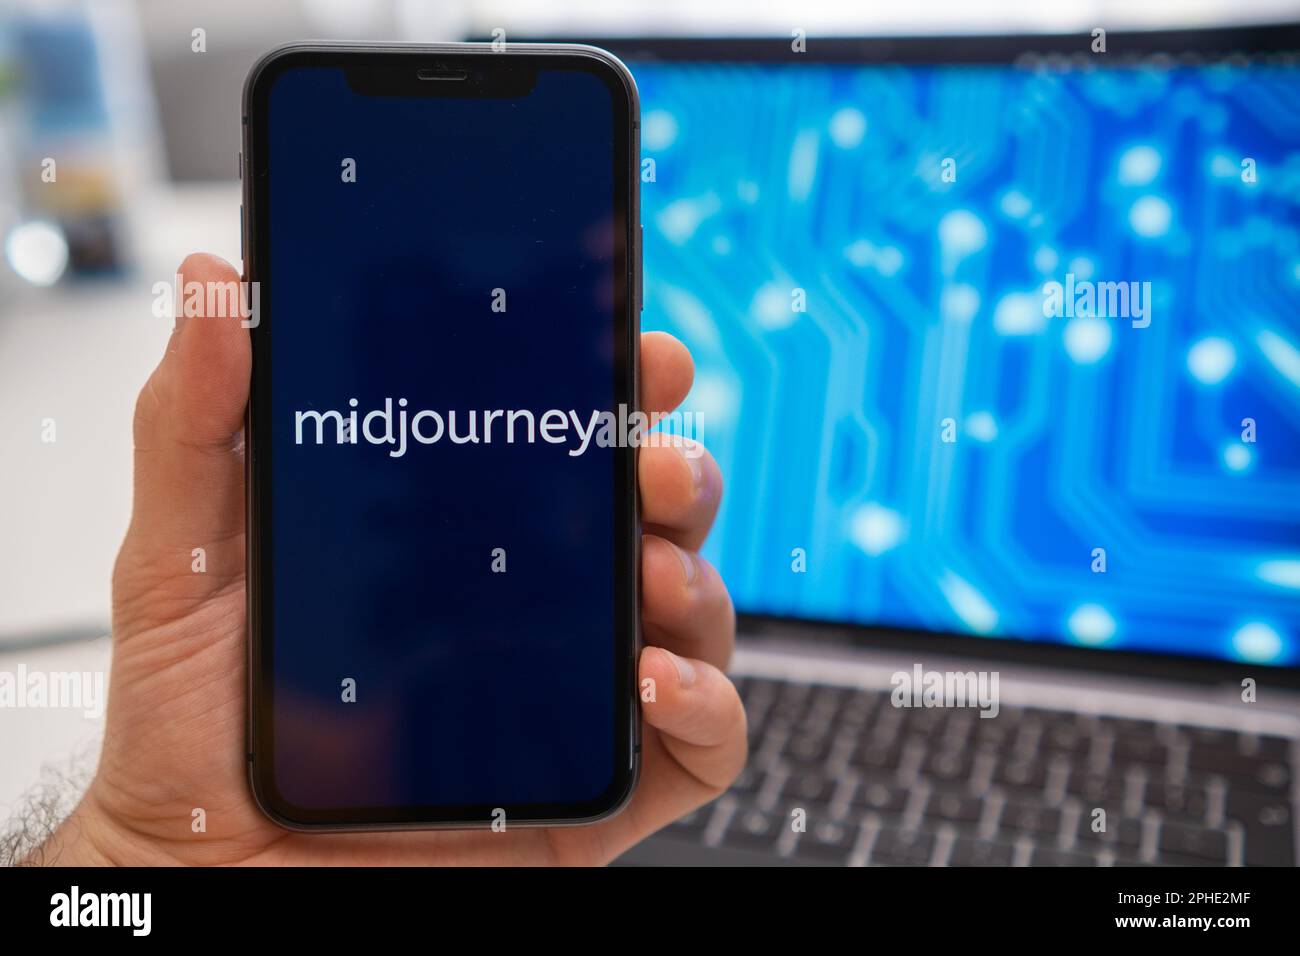 Midjourney logo of neural network on the screen of smartphone in mans hand and laptop with neuronet on the splash screen on the background. Artificial intelligence concept, March 2023, Prague, Czech Republic. Stock Photo